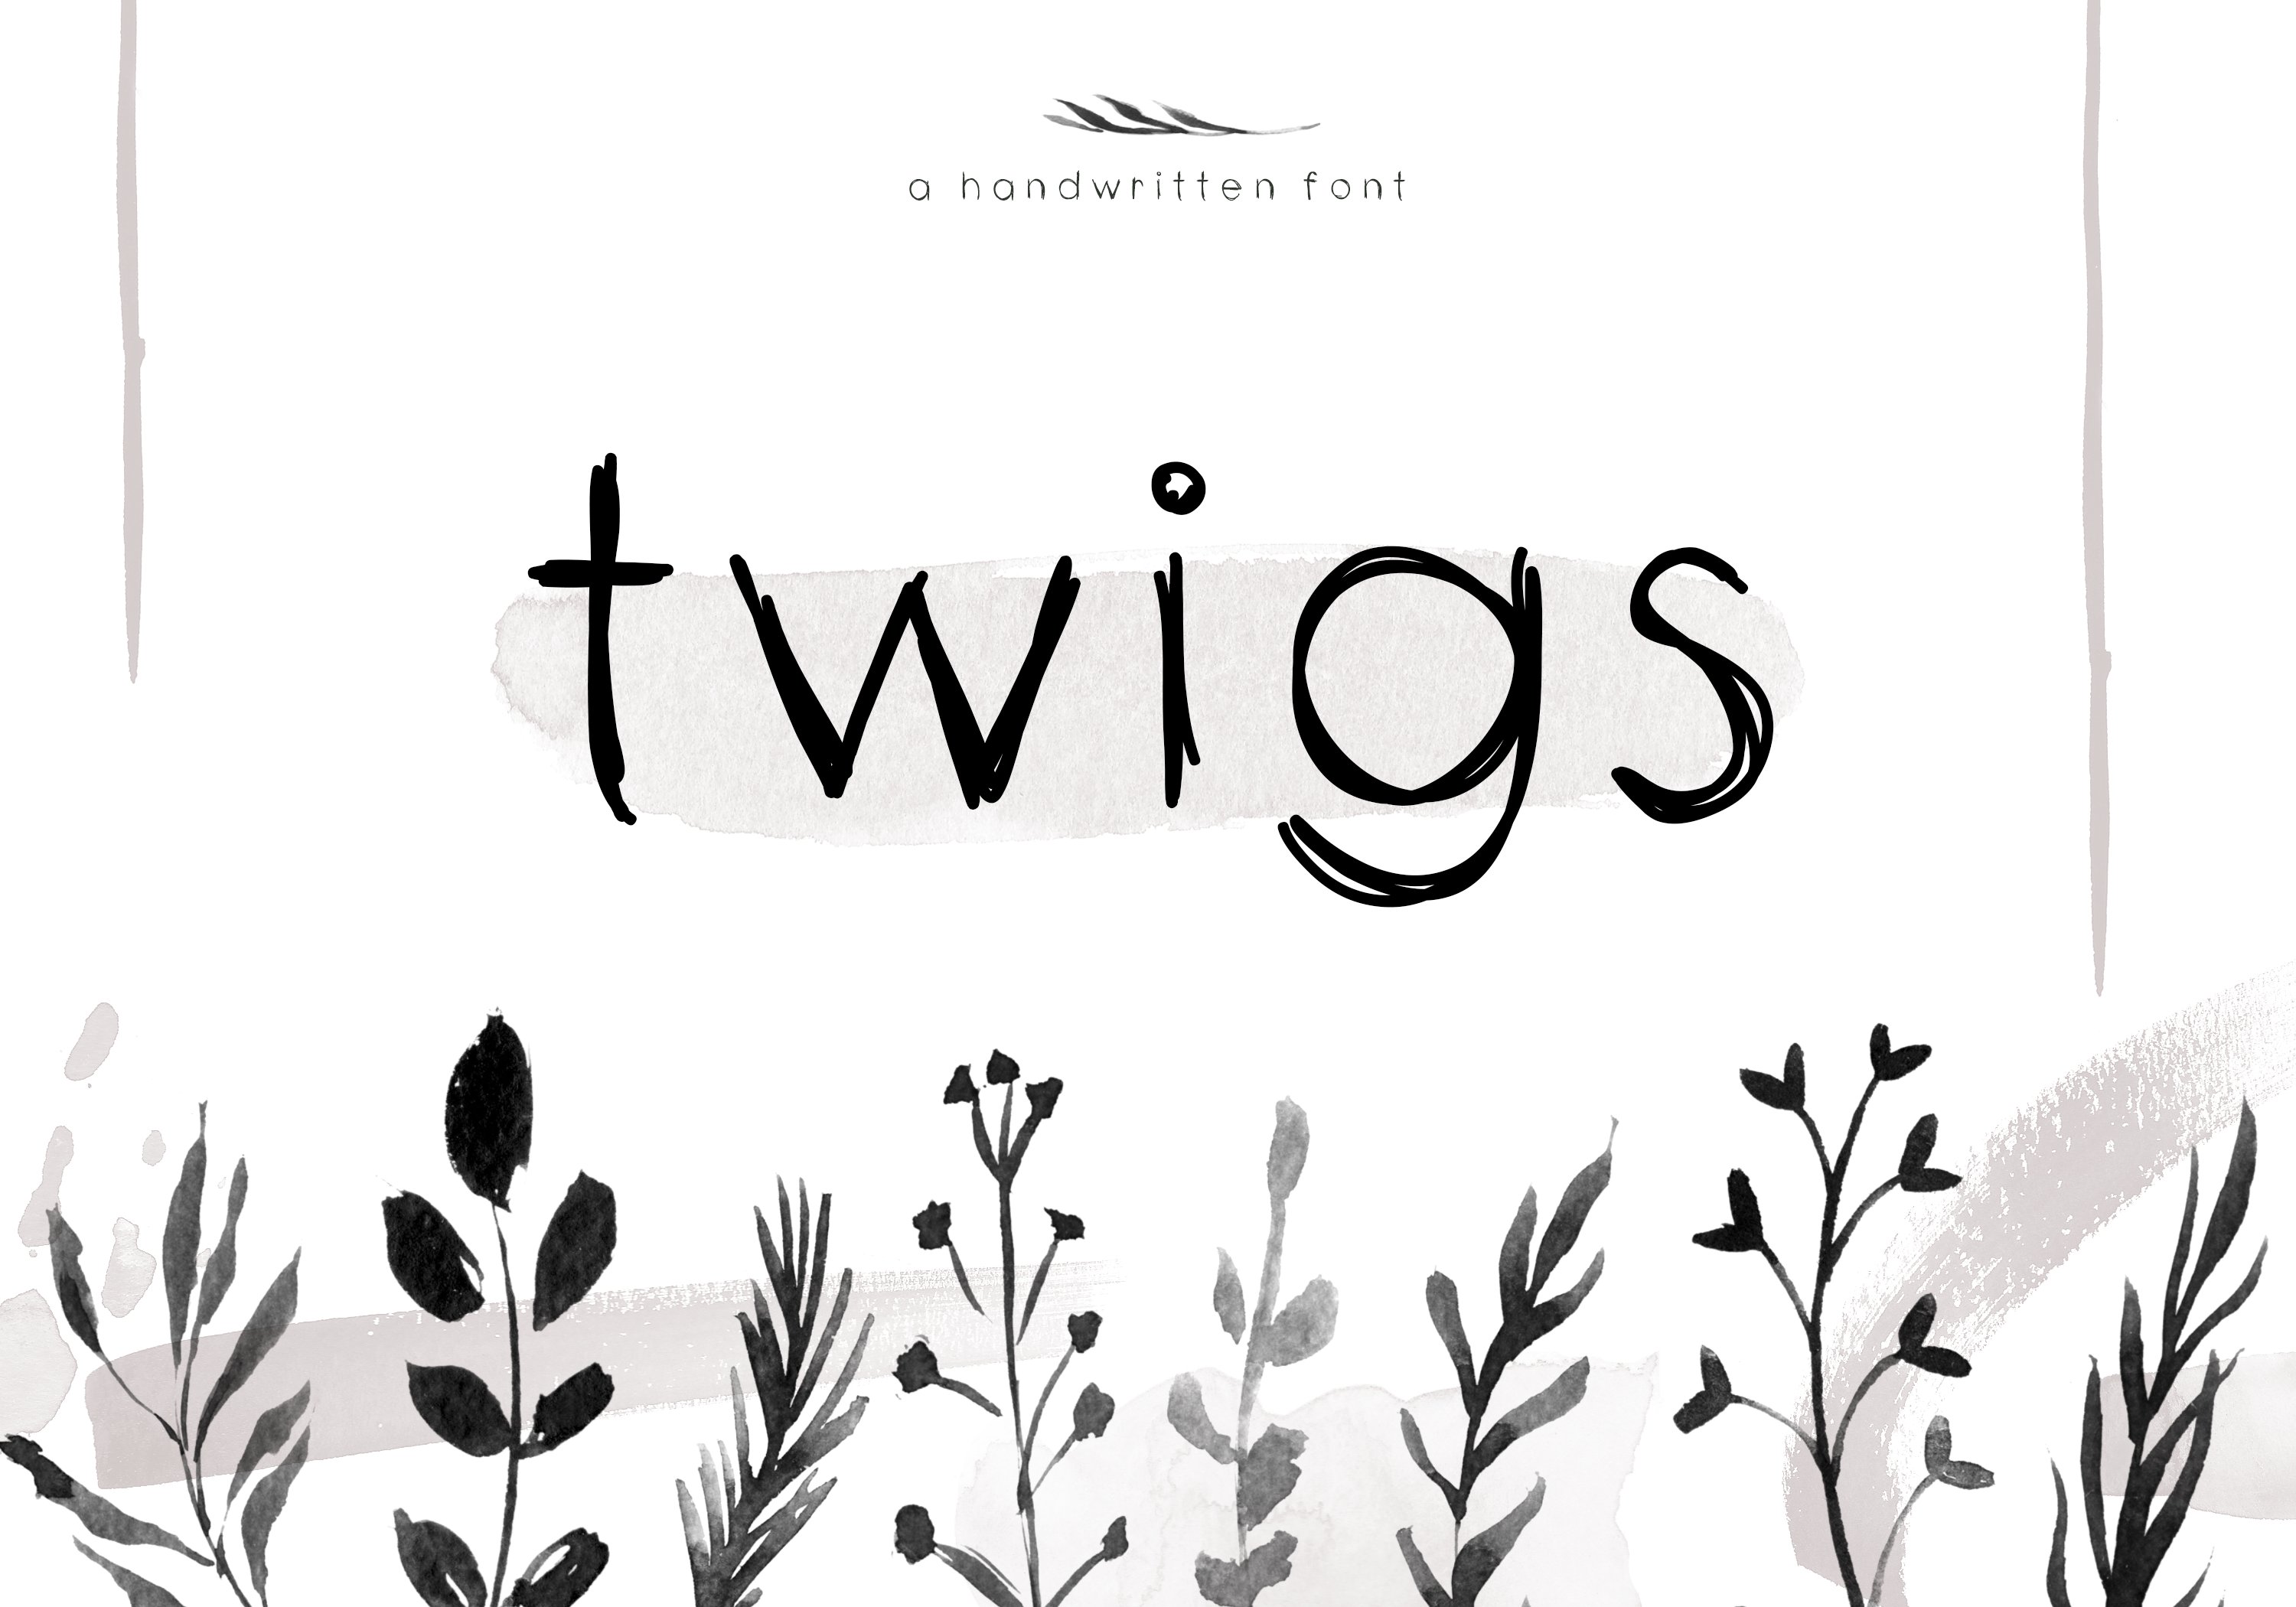 Twigs - A Handwritten Scribble Font cover image.